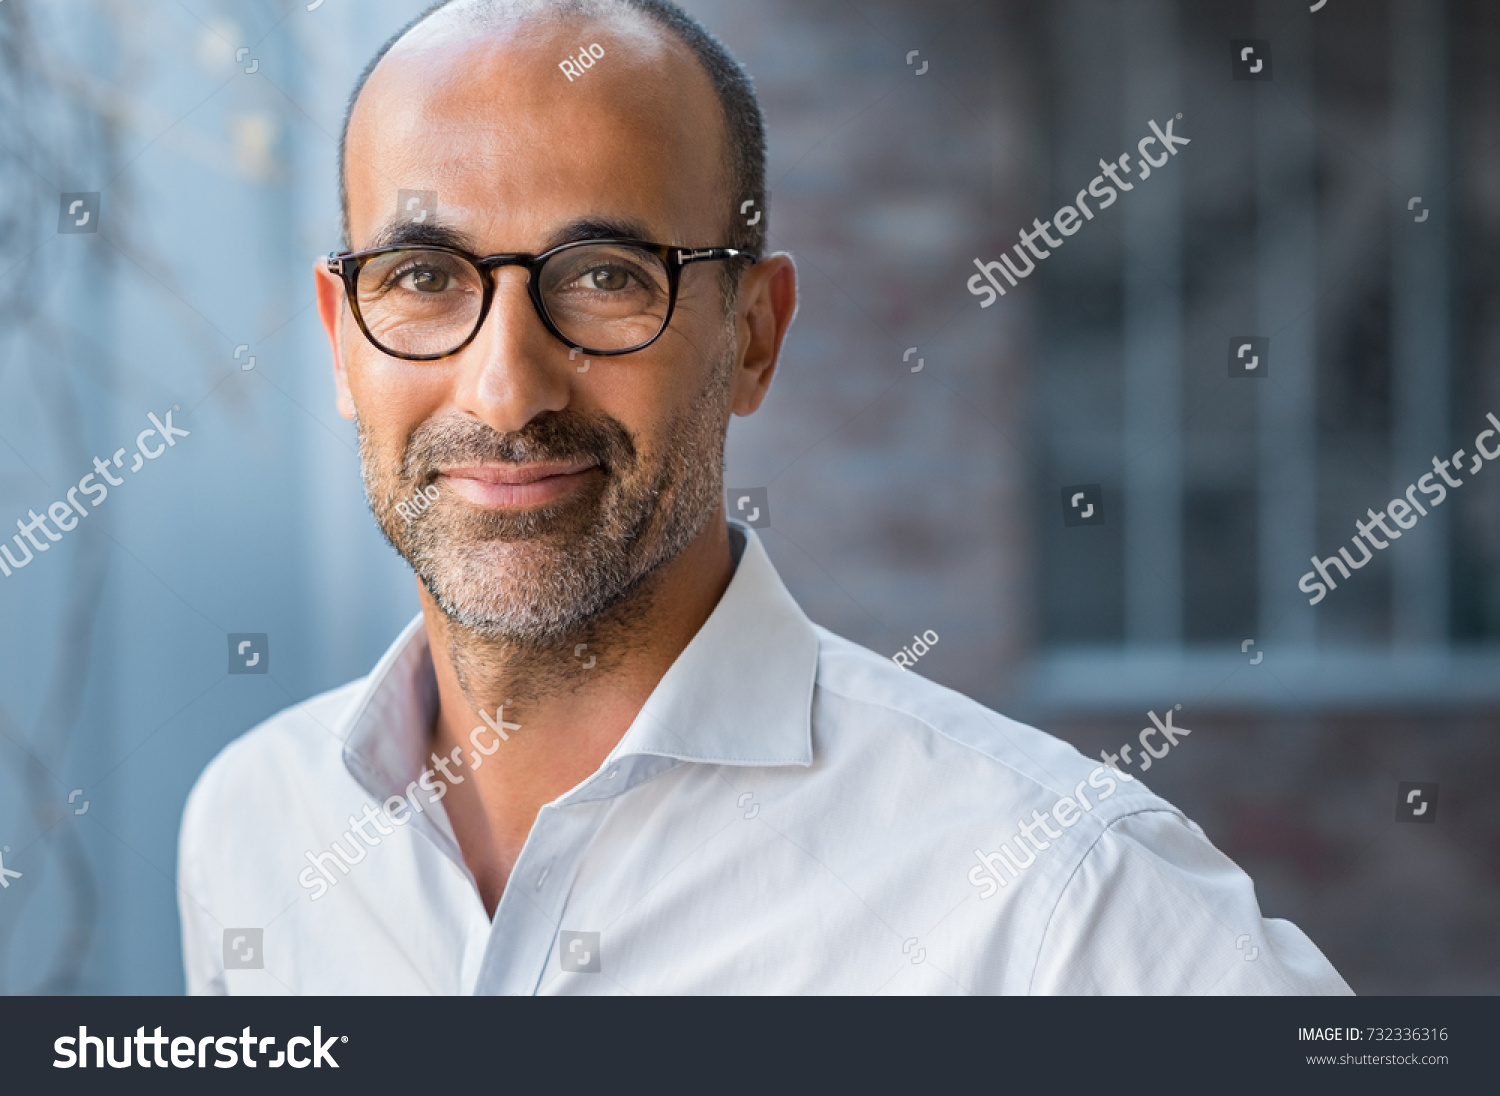 Portrait of happy mature man wearing spectacles and looking at camera outdoor. Man with beard and glasses feeling confident. Close up face of hispanic business man smiling.